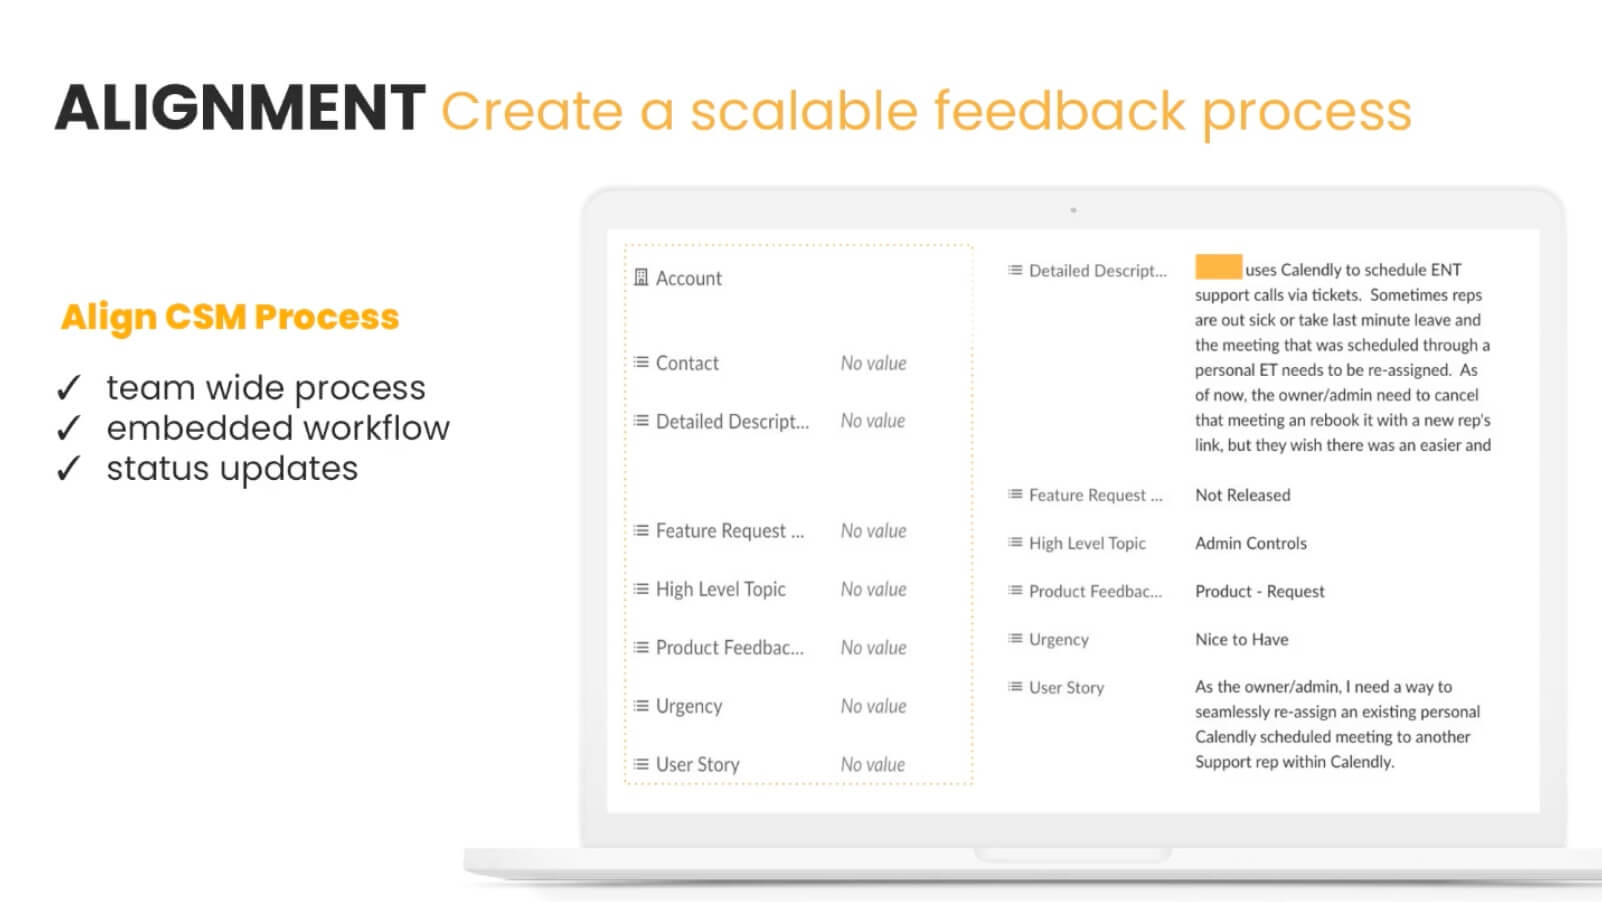 Alignment: create a scalable feedback process